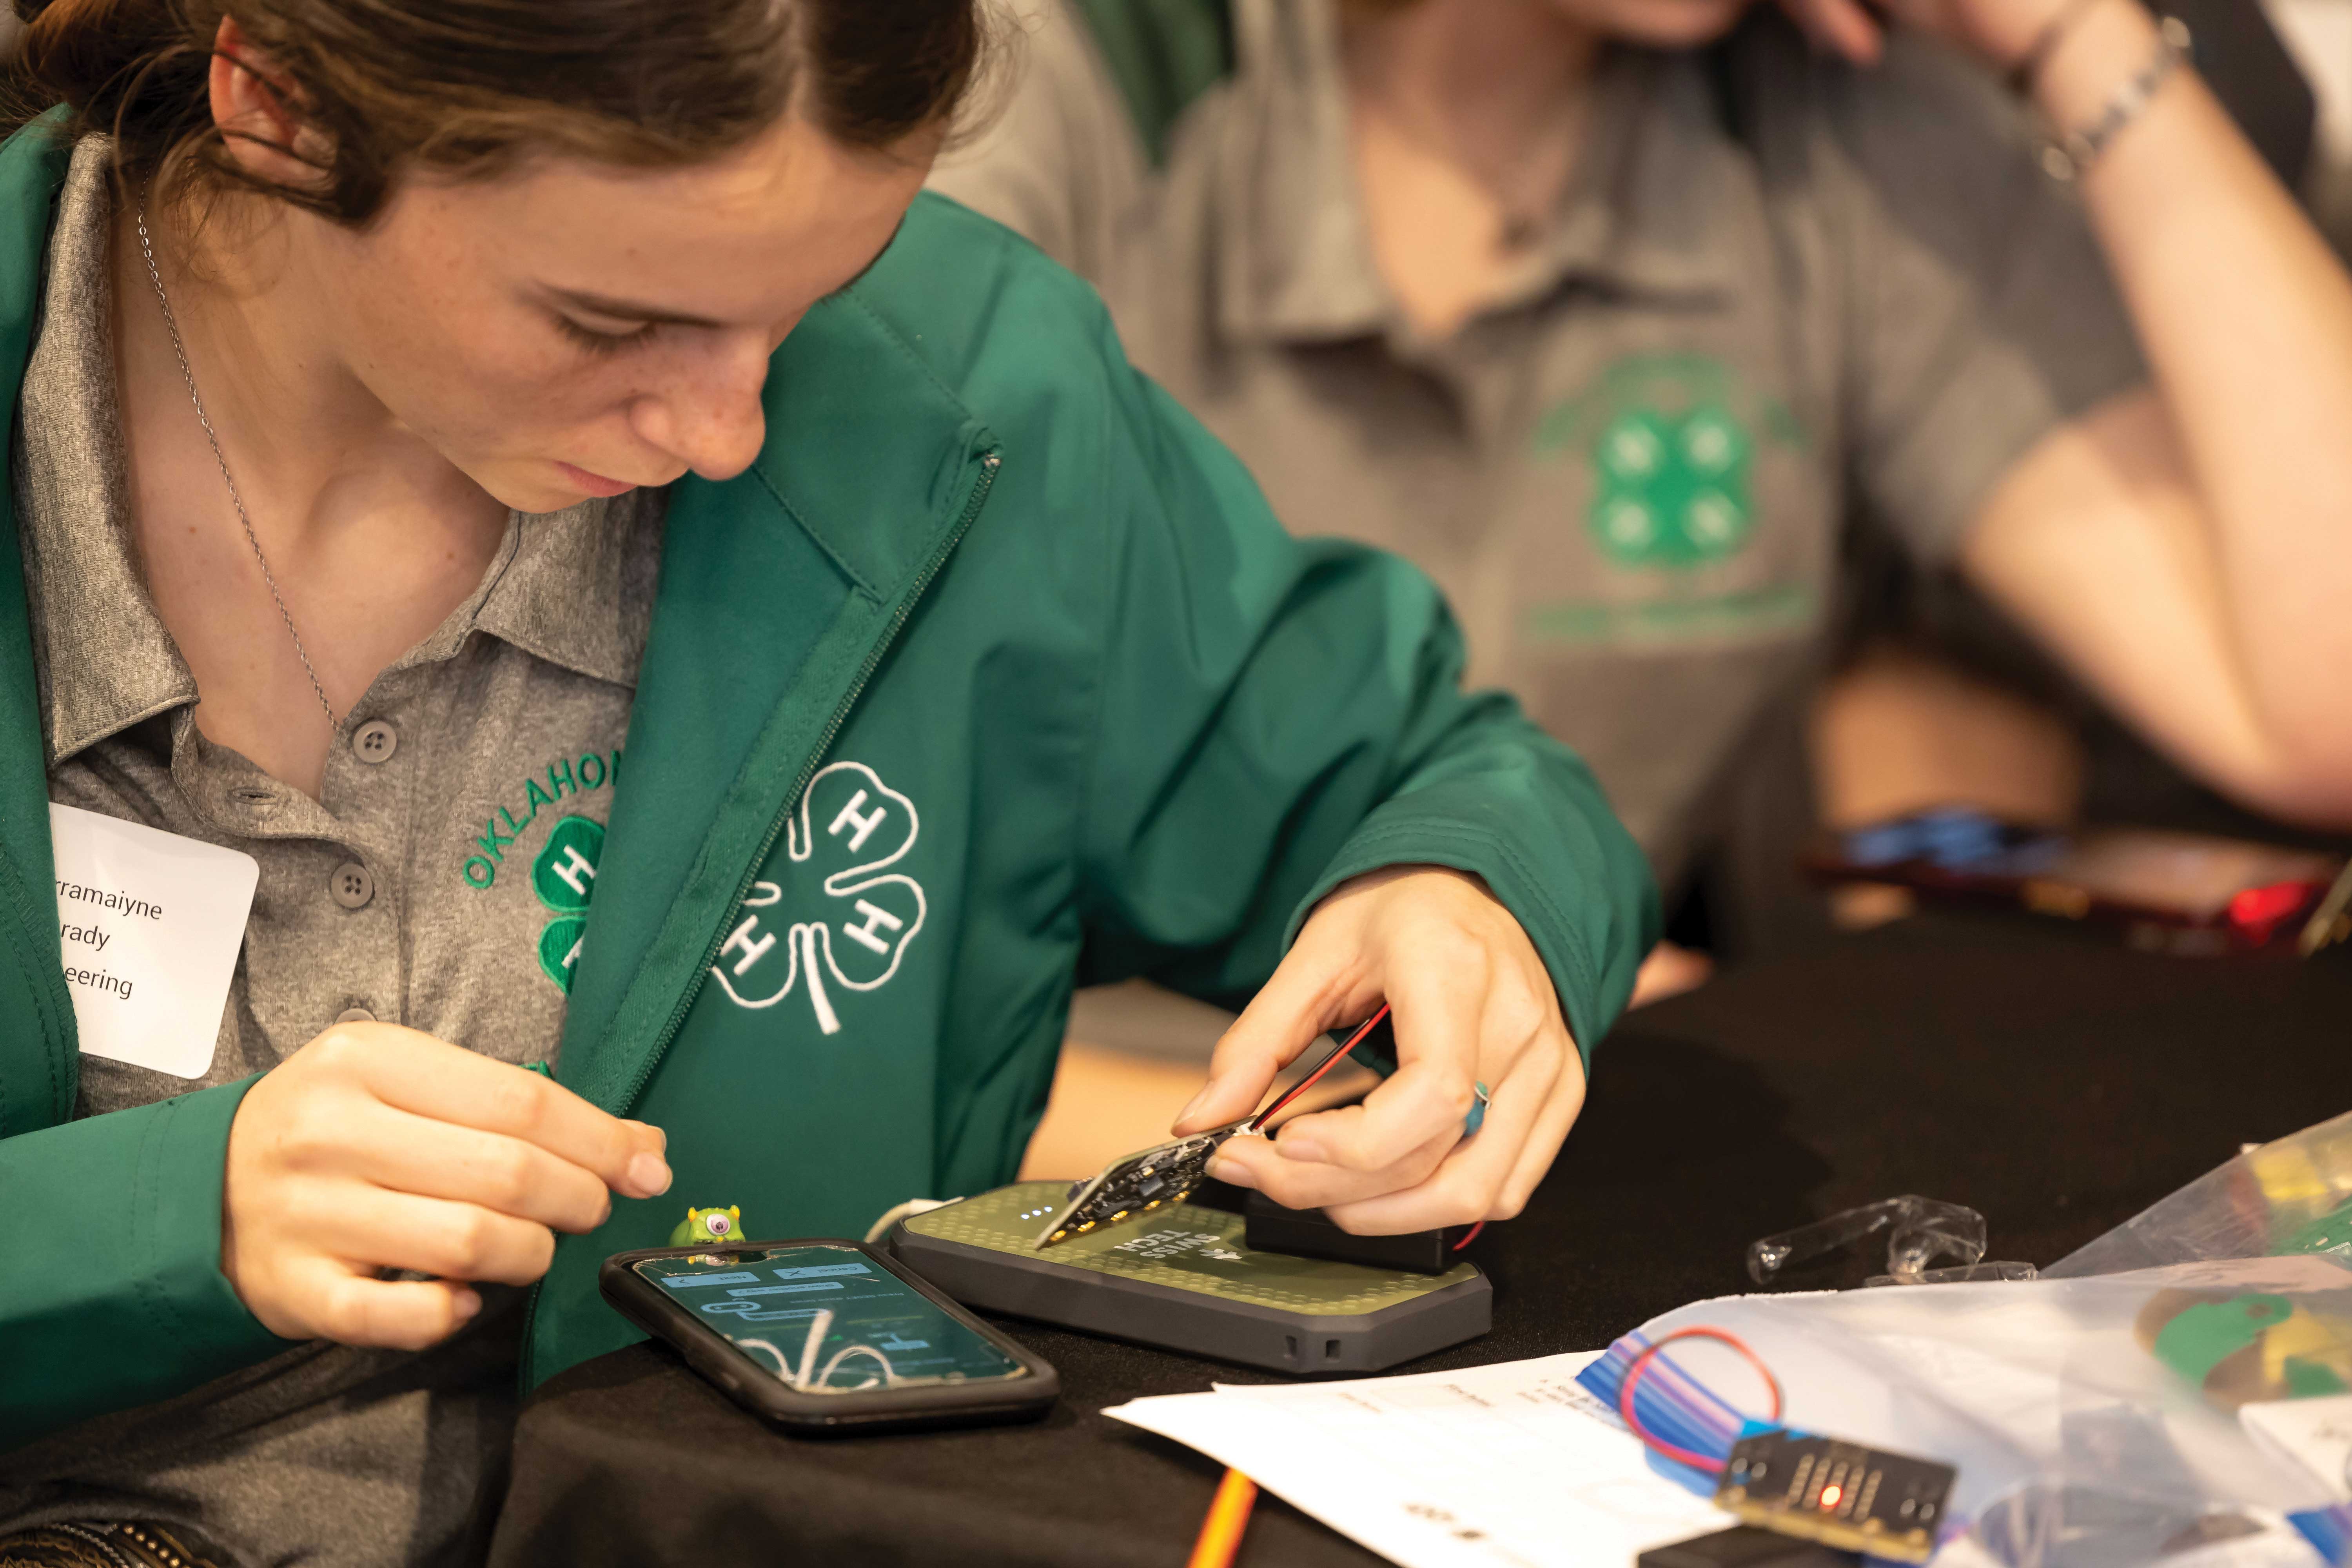 Charramaiyne Brown uses block coding to program a micro:bit pocket-sized computer during the 4-H Youth Innovate Summit. The micro:bit introduces youth to how software and hardware work together